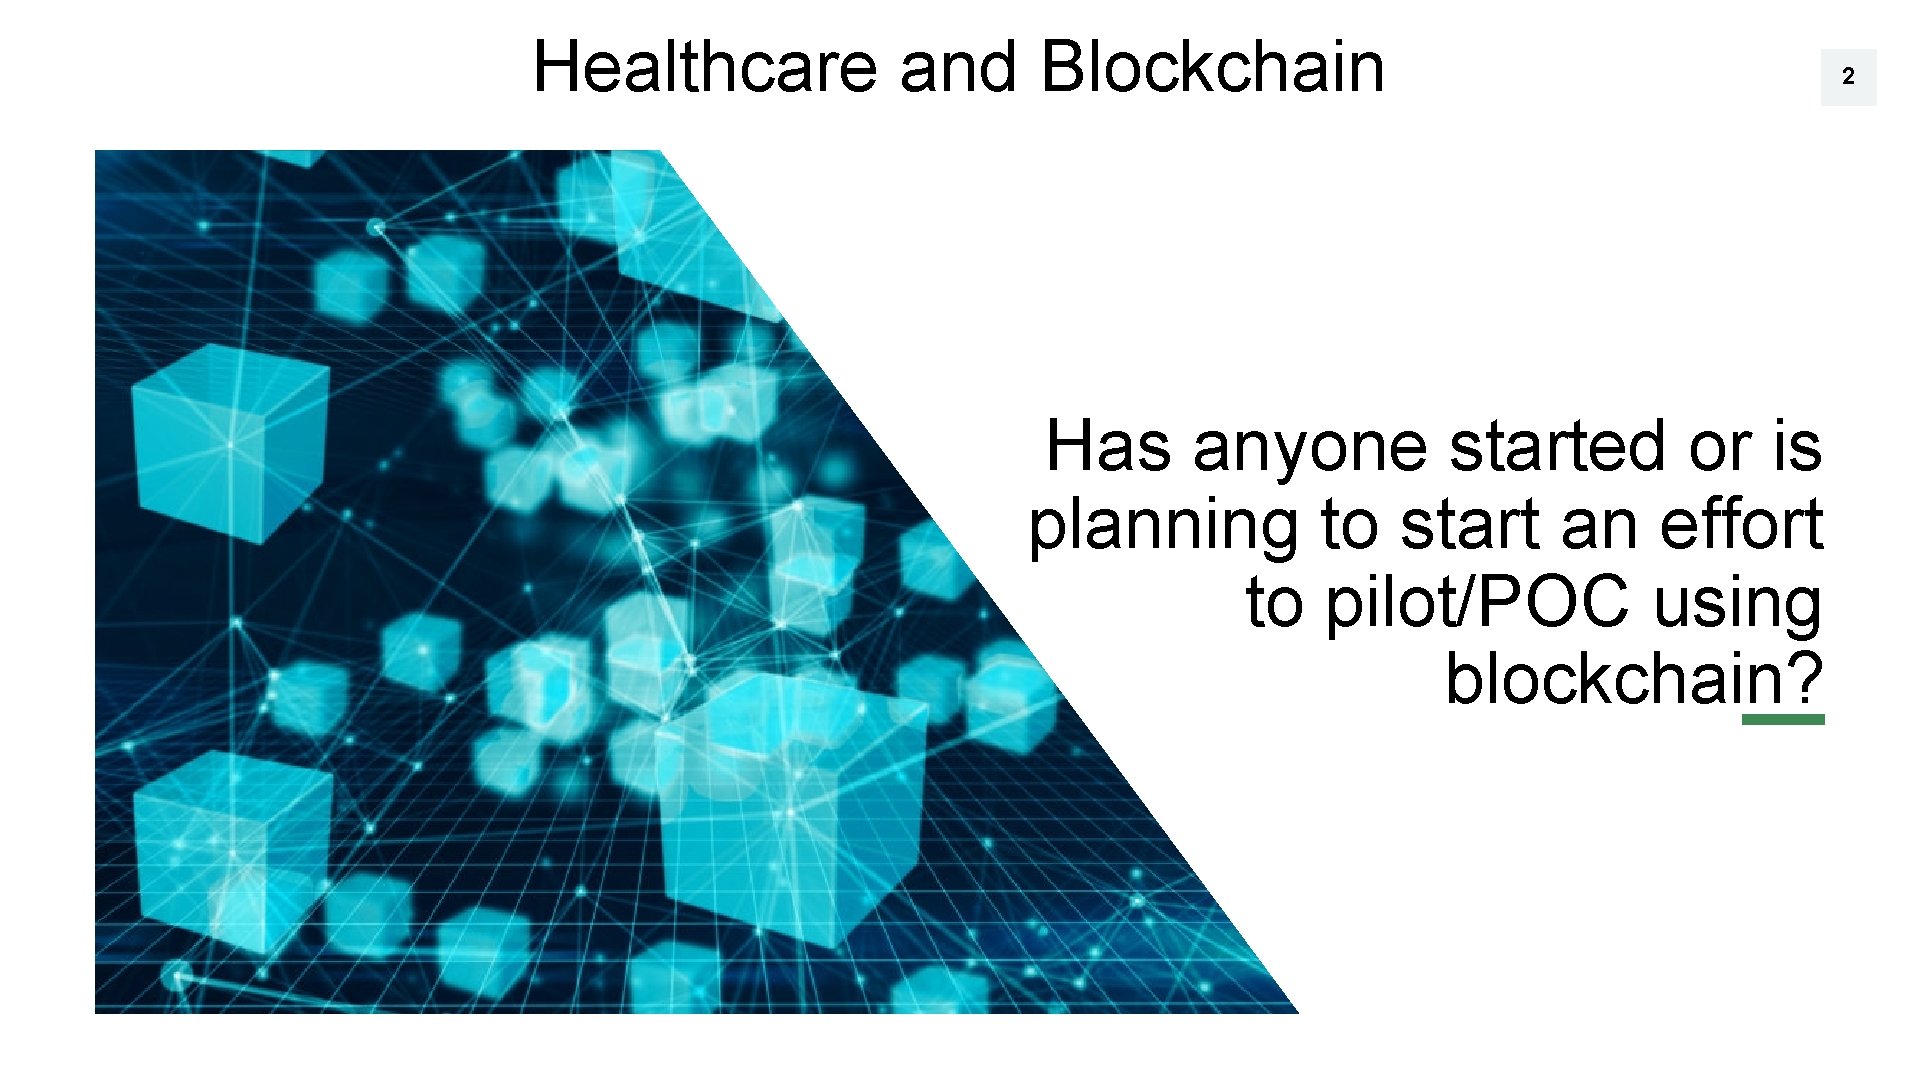 Healthcare and Blockchain Has anyone started or is planning to start an effort to